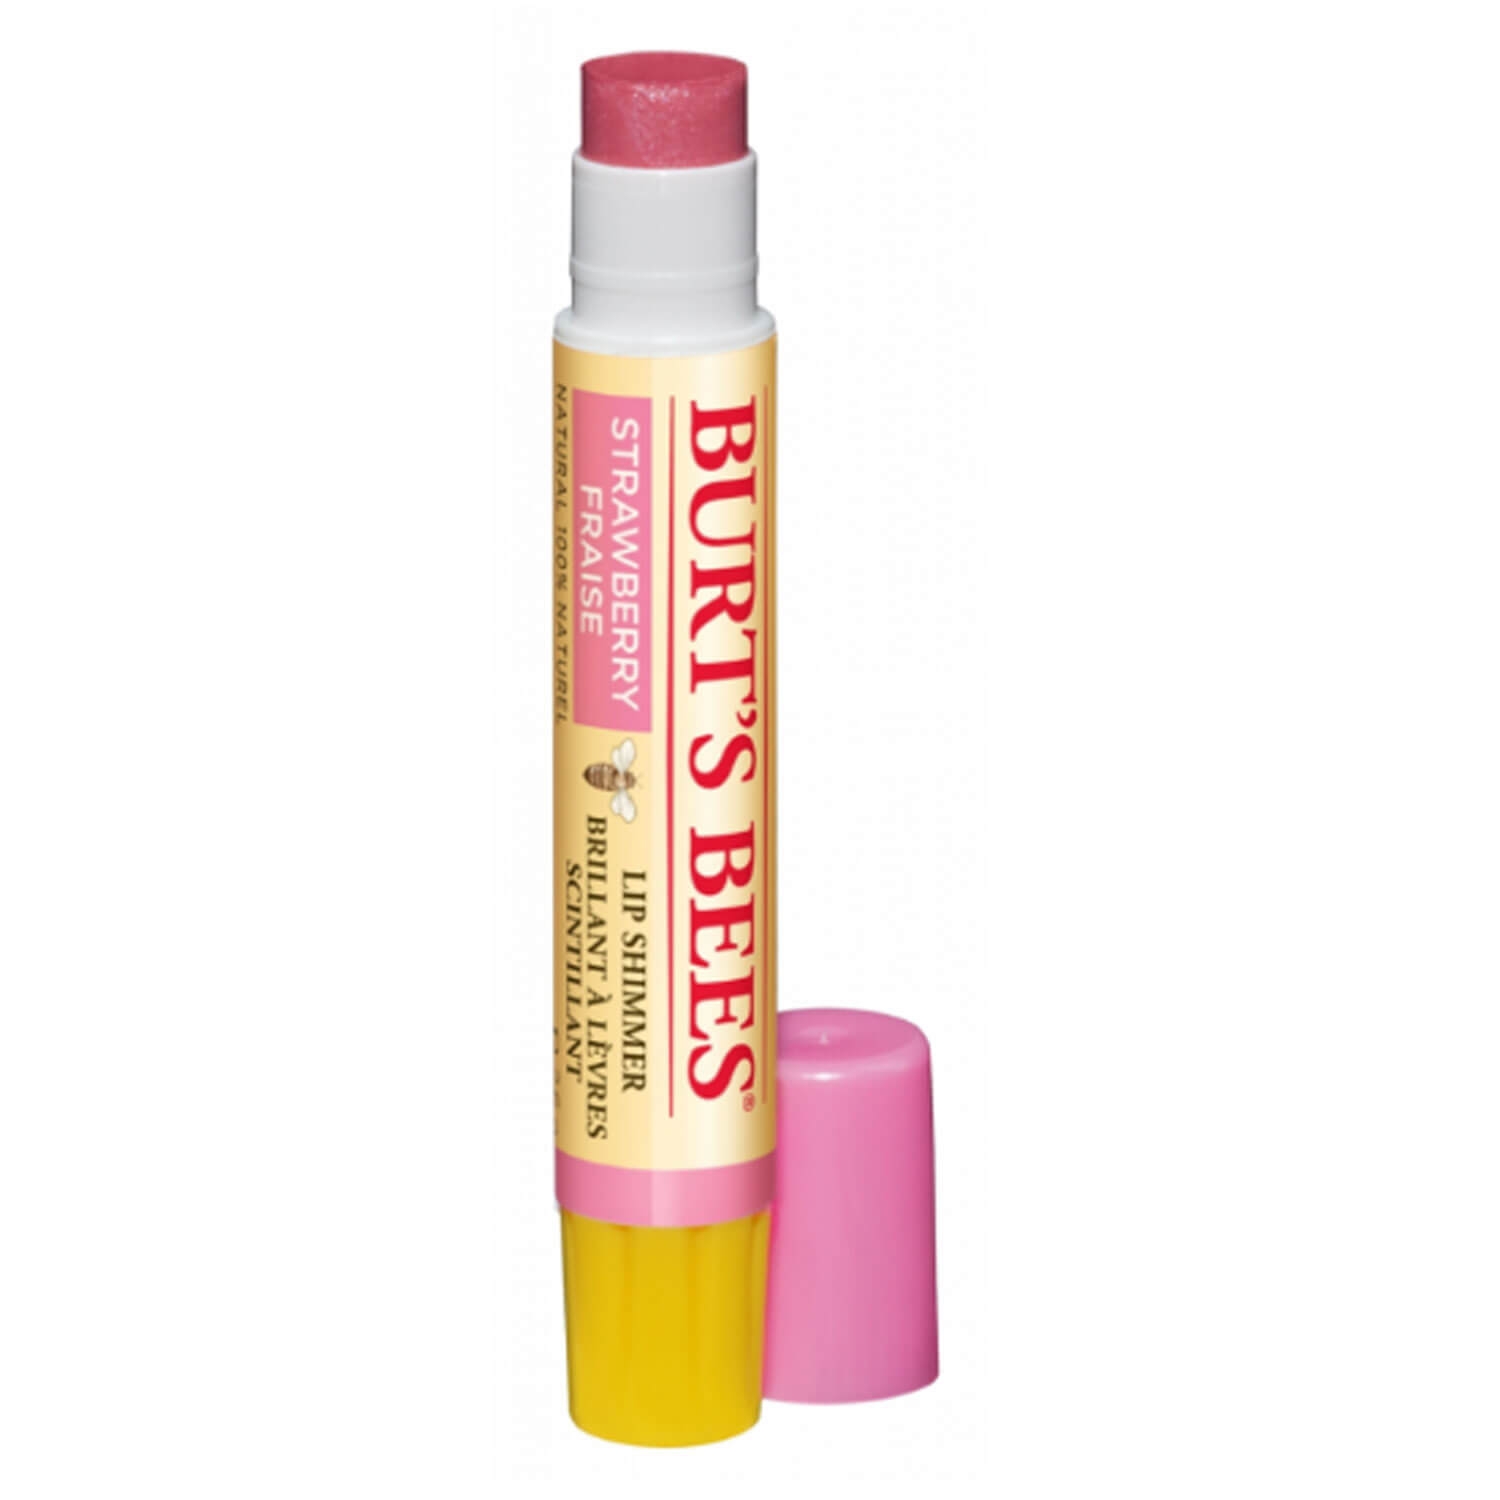 Product image from Burt's Bees - Lip Shimmer Strawberry